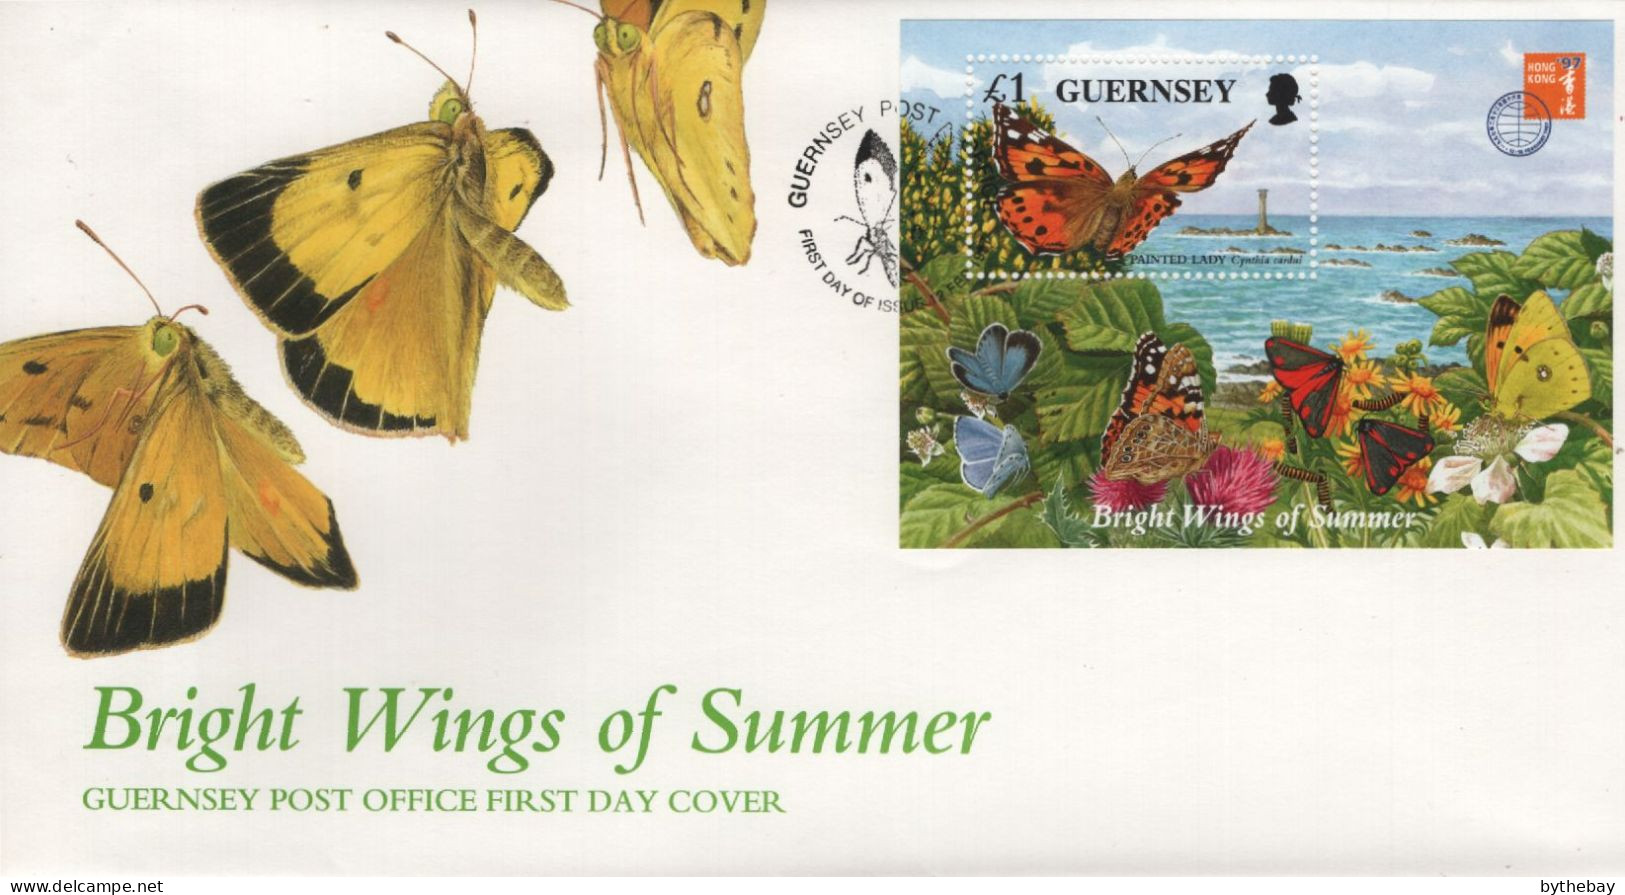 Guernsey 1997 FDC Sc 590 1pd Painted Lady Butterfly, Lighthouse Sheet Hong Kong 97 - Guernsey